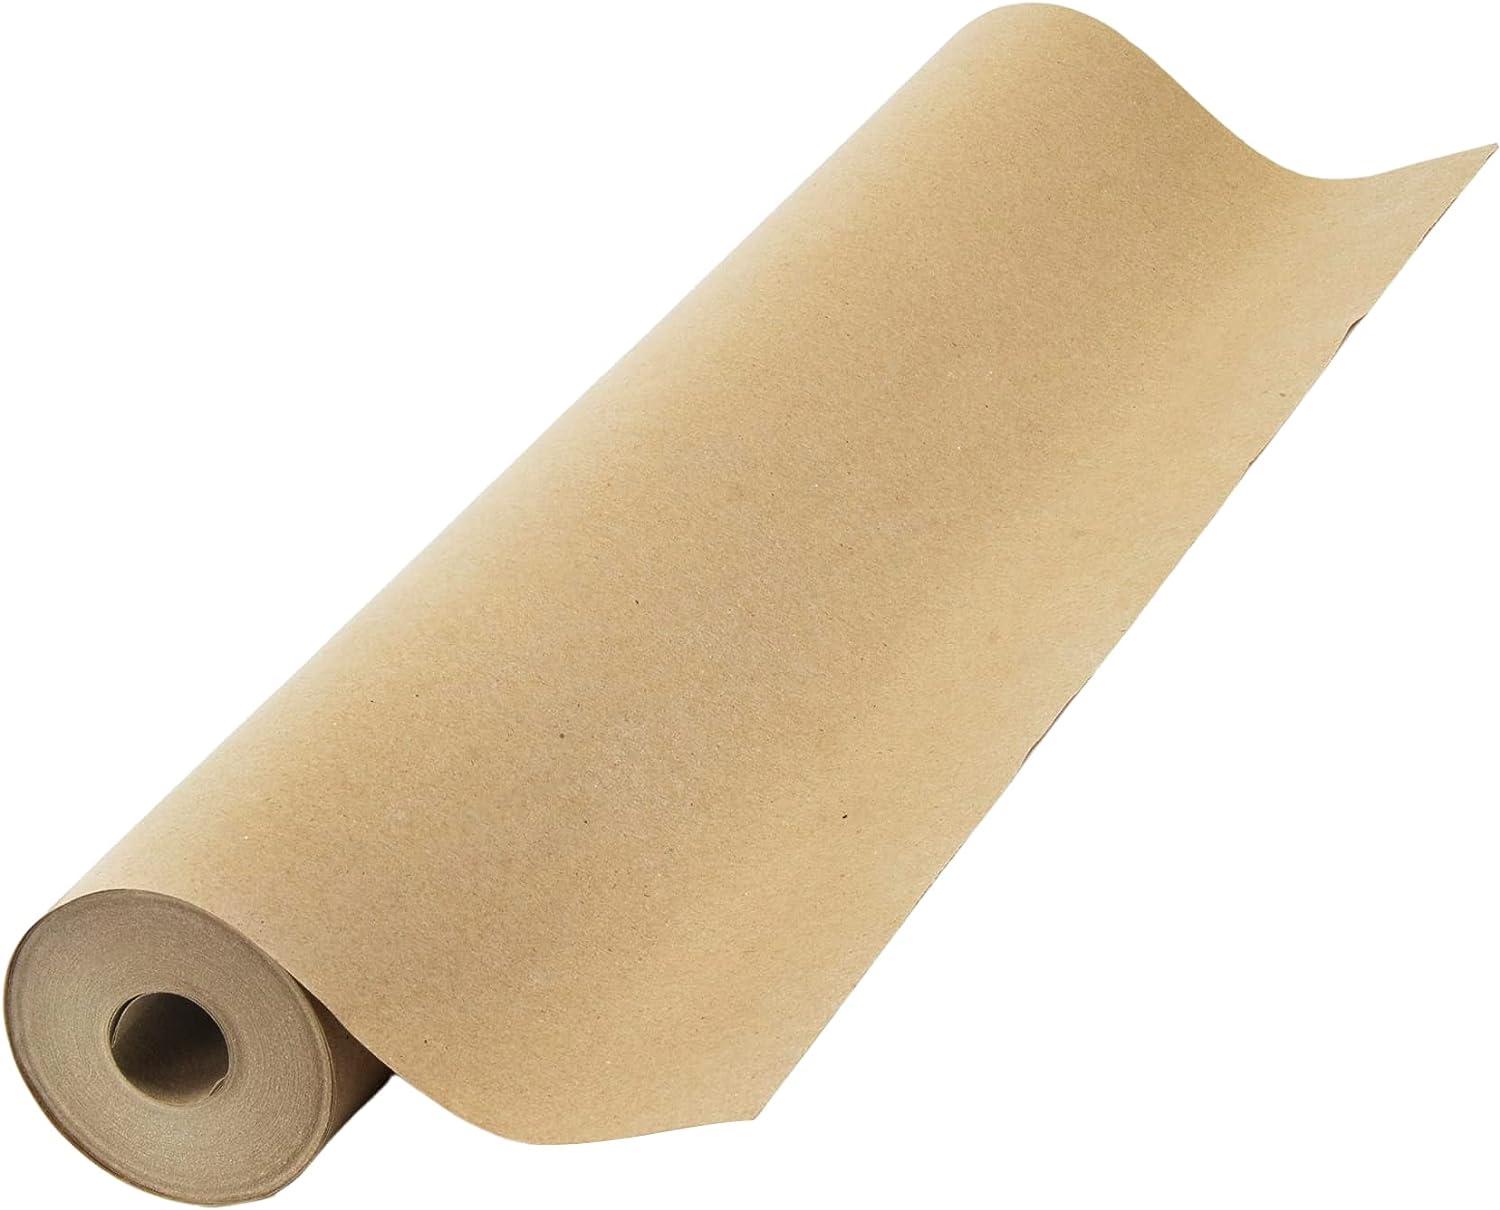 BOX USA Kraft Brown Paper Sheet, 30#, 24 x 36, 100% Recycled Paper, 833  Sheets Per Case, Ideal for Shipping, Packing, Moving, Gift Wrapping, Craft